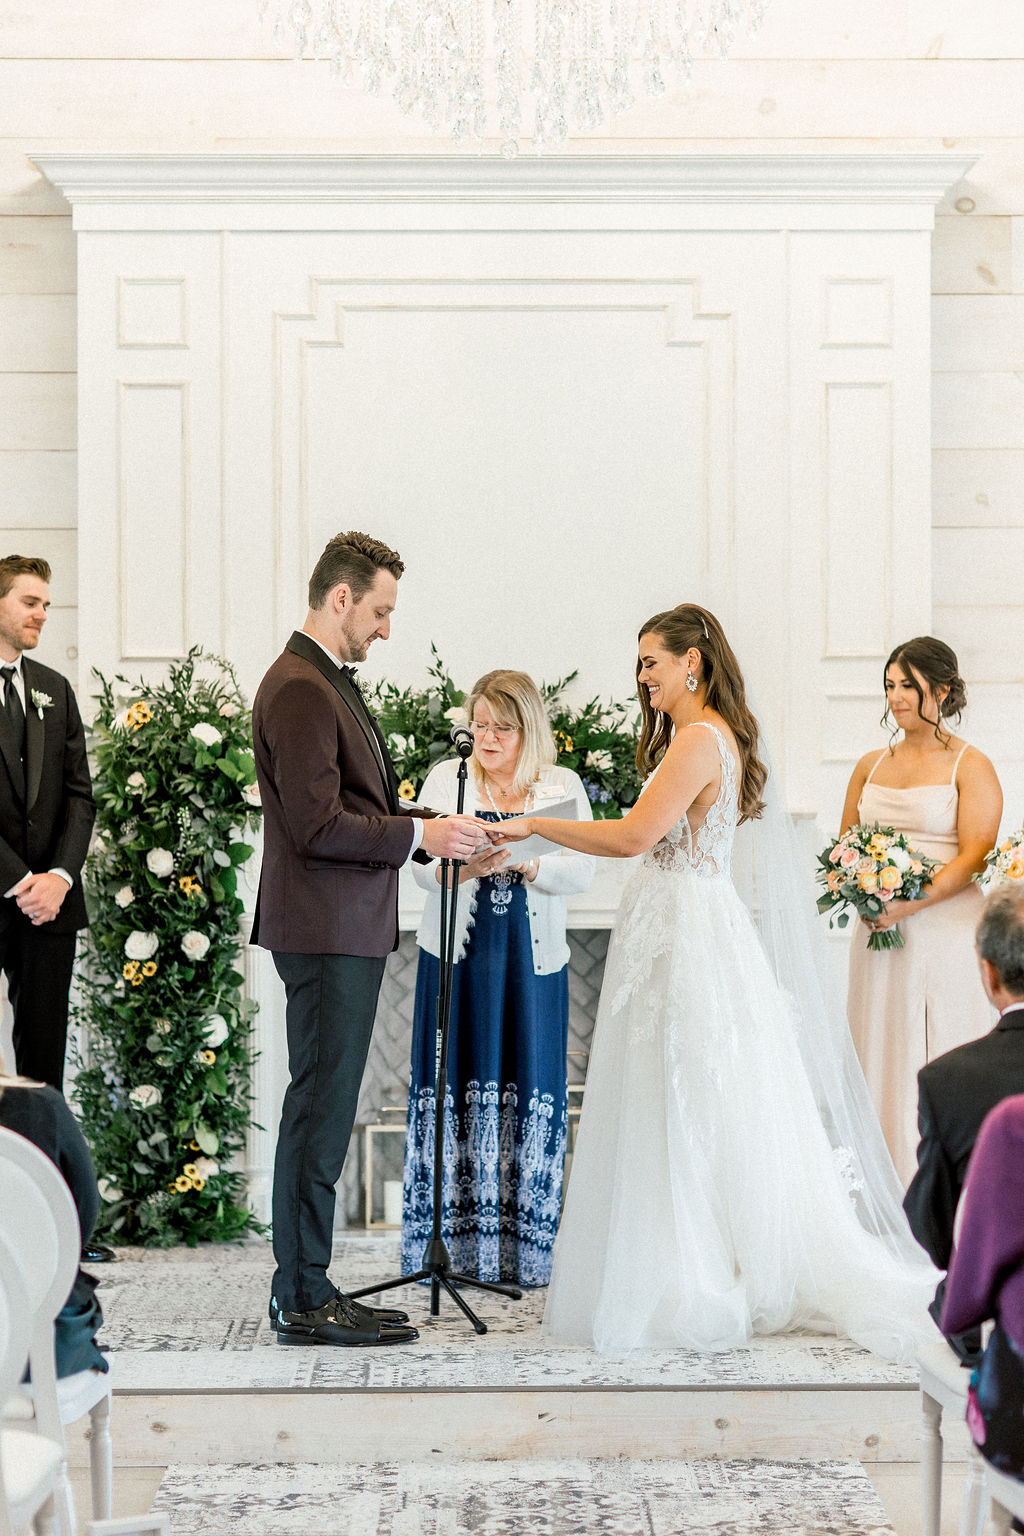 Floral Reef Designs Ottawa Wedding Florist - Amy Pinder Photography - Stonefields Estate wedding - Christie and Trevor getting married in front of fireplace greenery and floral installation